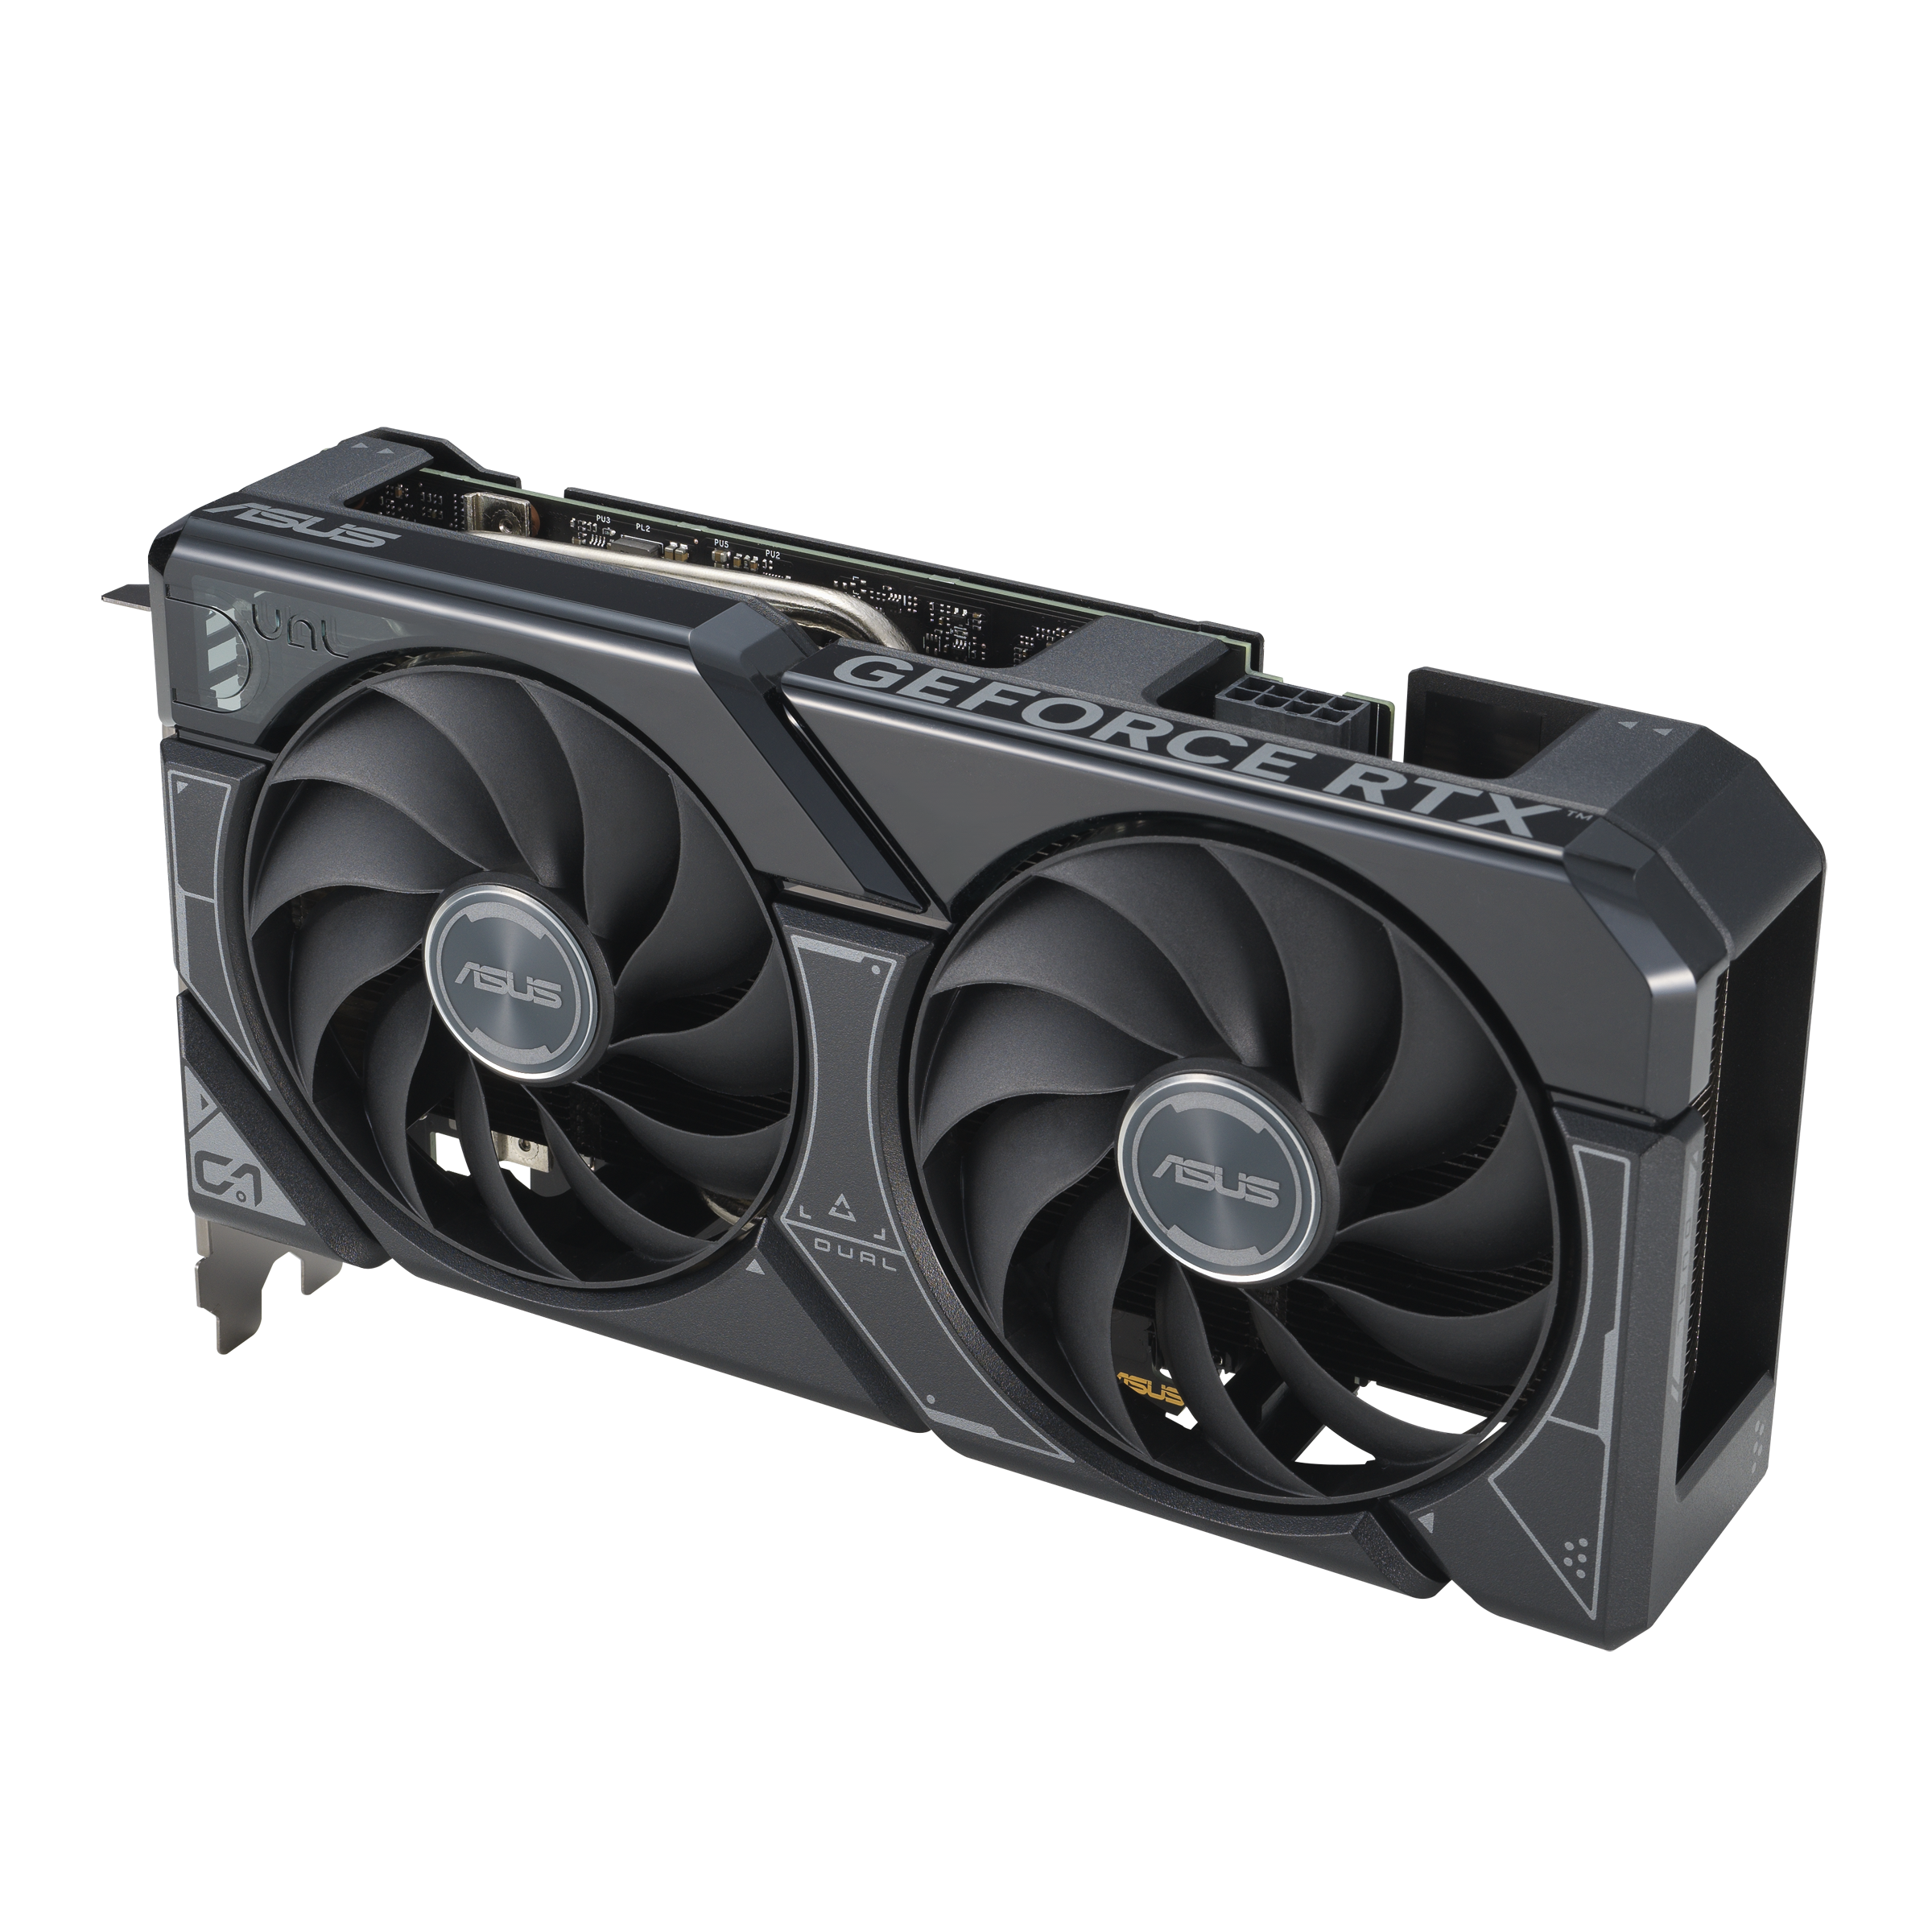 ASUS GeForce RTX 4060 Ti Dual with M.2 Slot Review - Gen 5